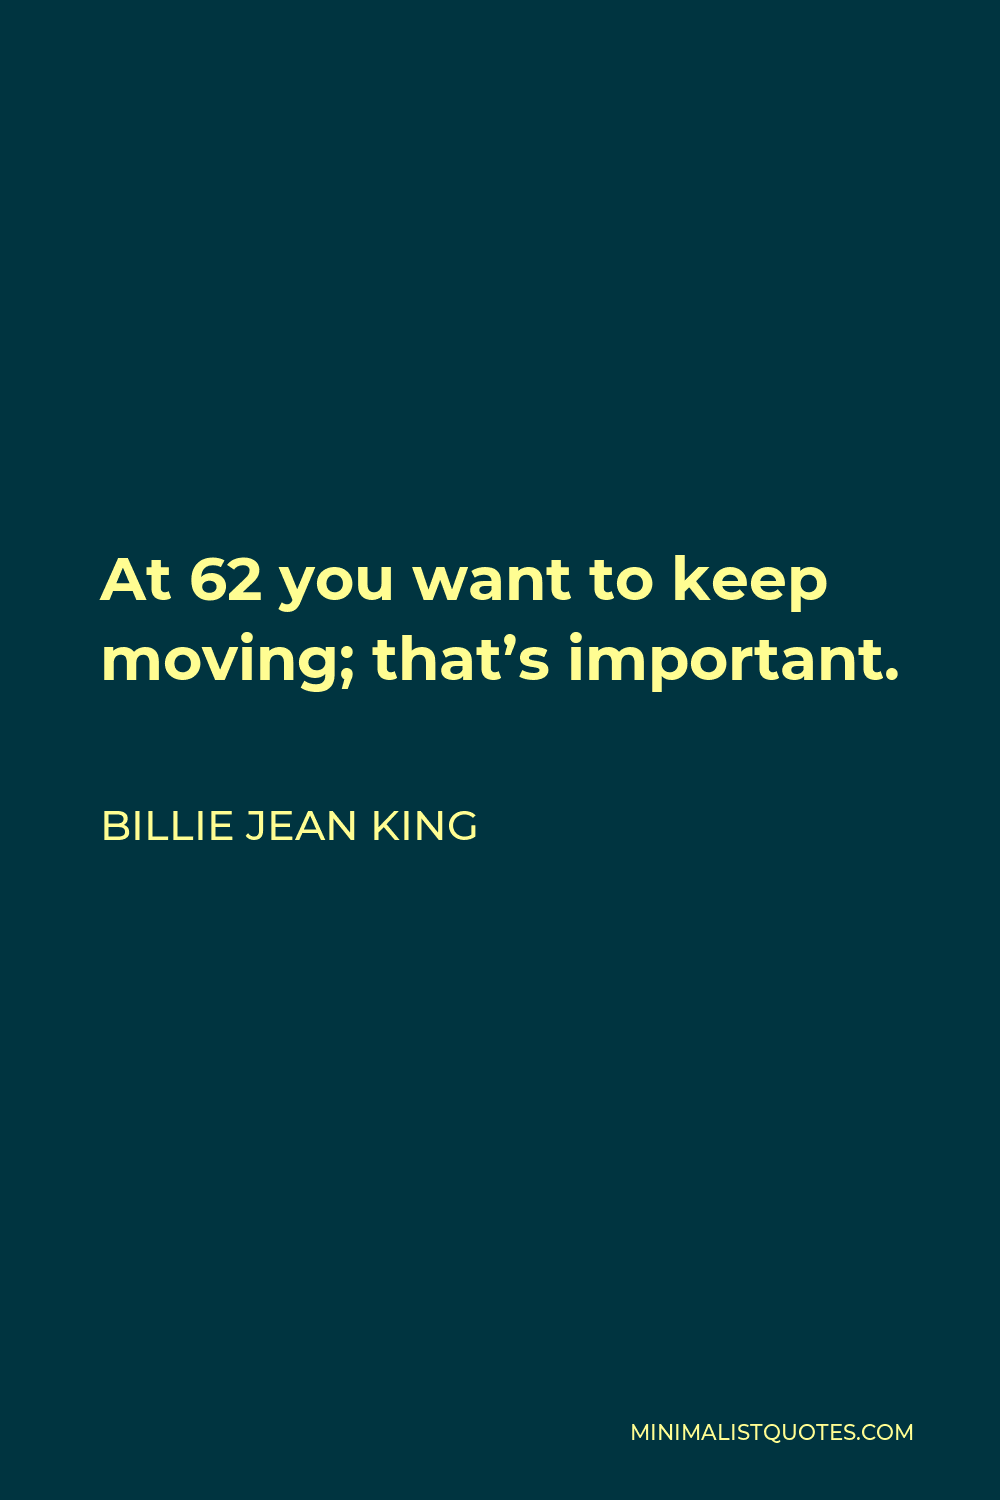 Billie Jean King Quote - At 62 you want to keep moving; that’s important.